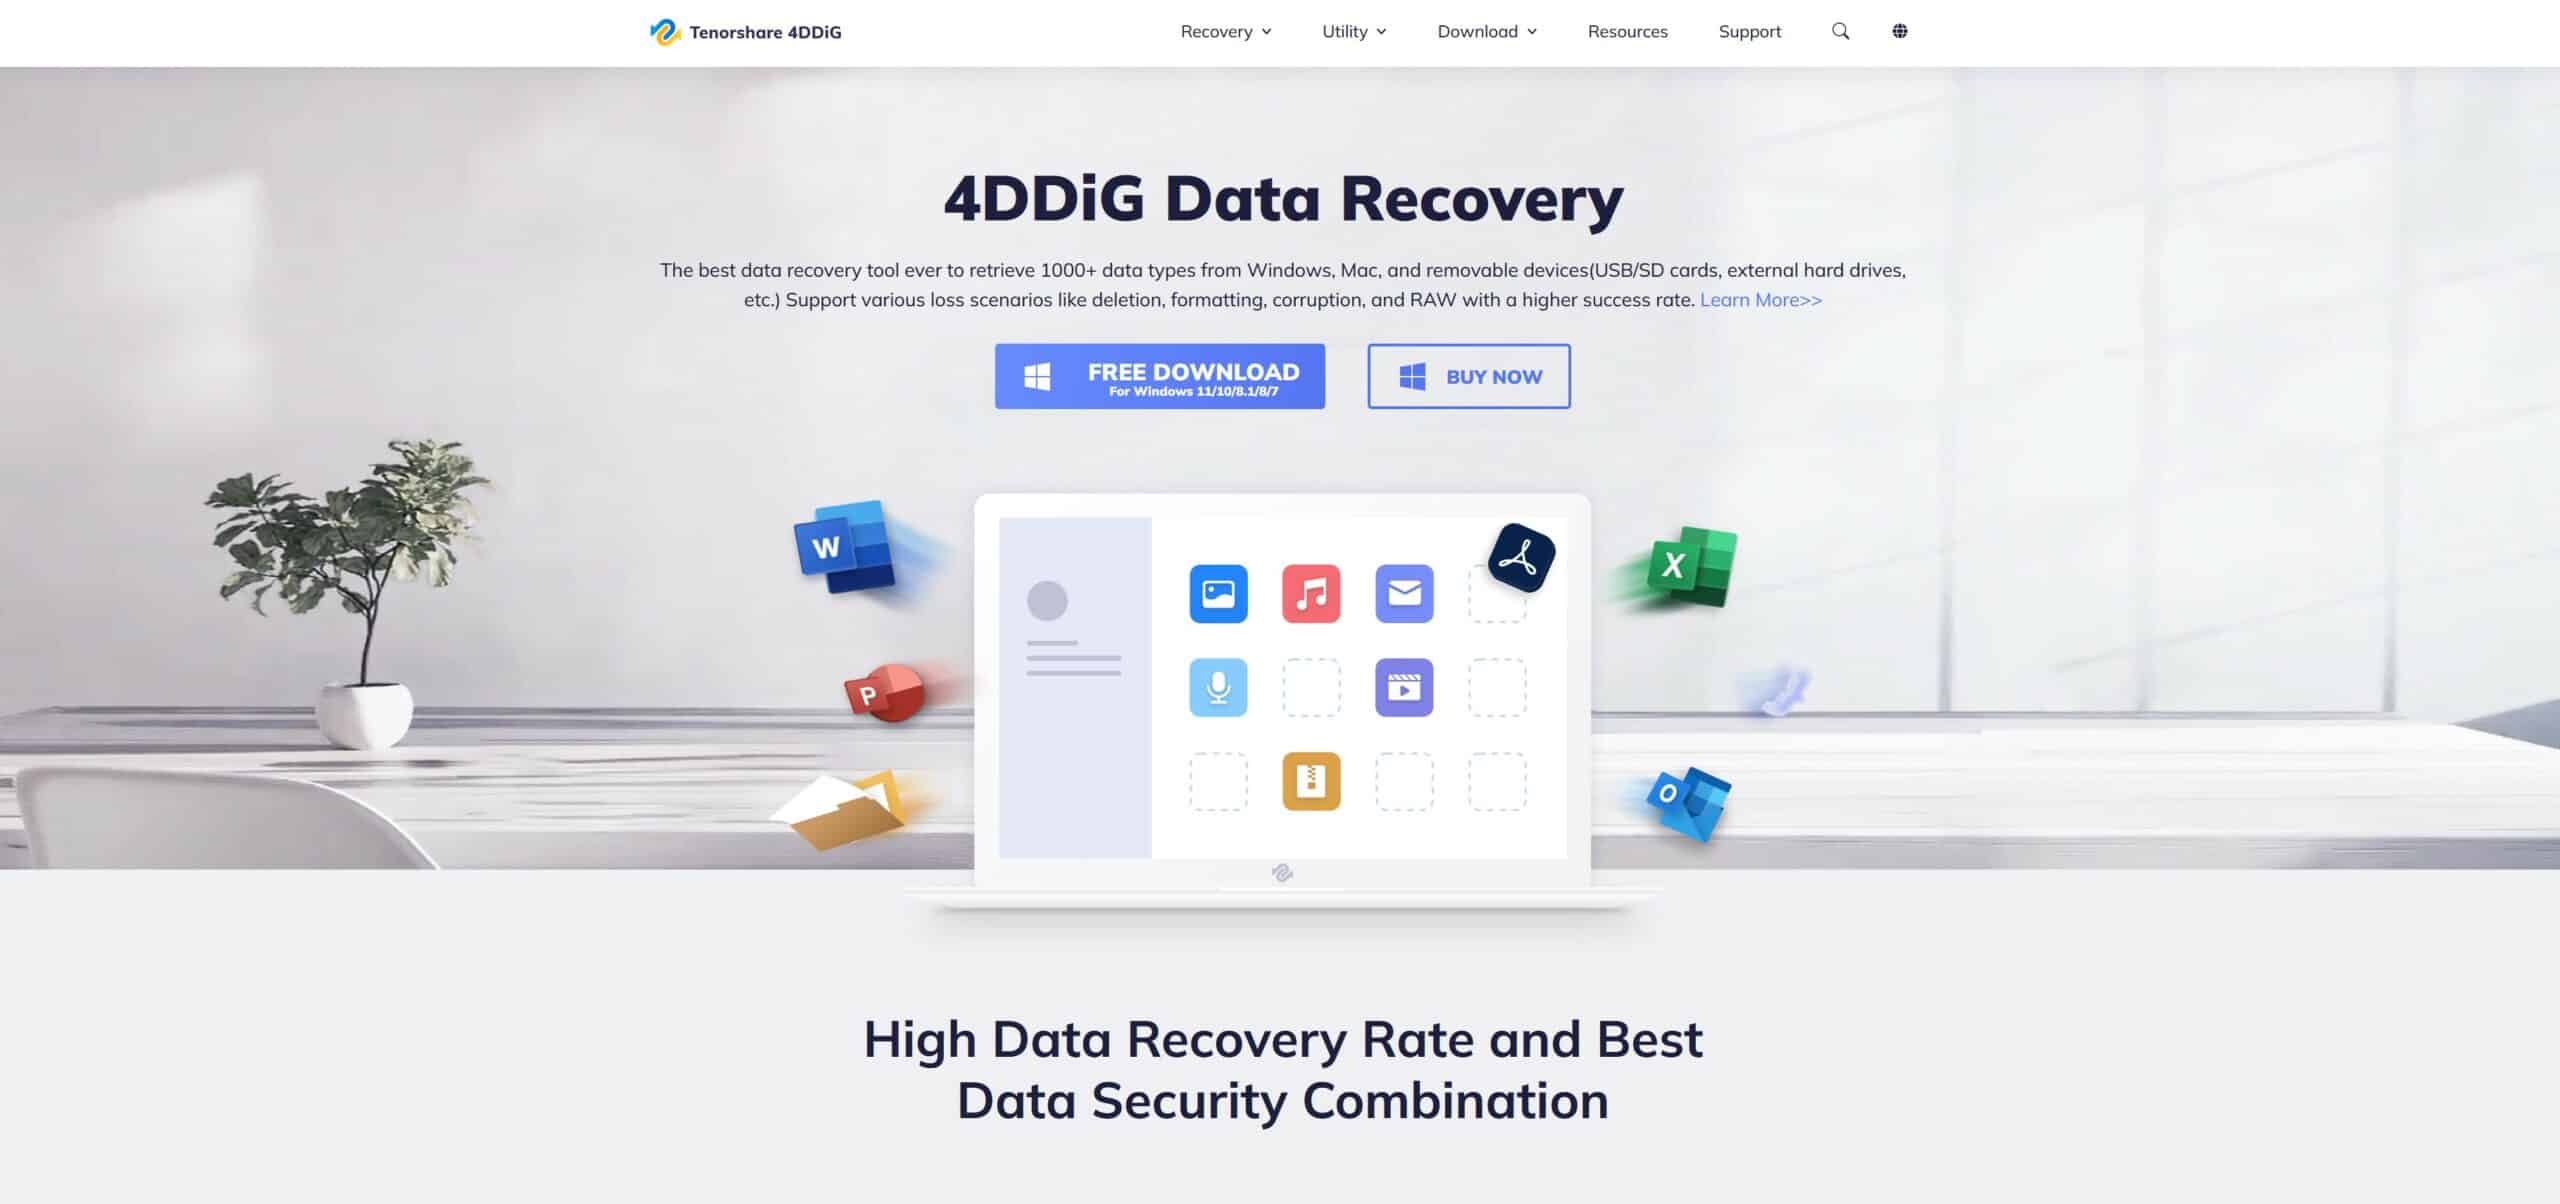 tenorshare 4ddig data recovery software safety